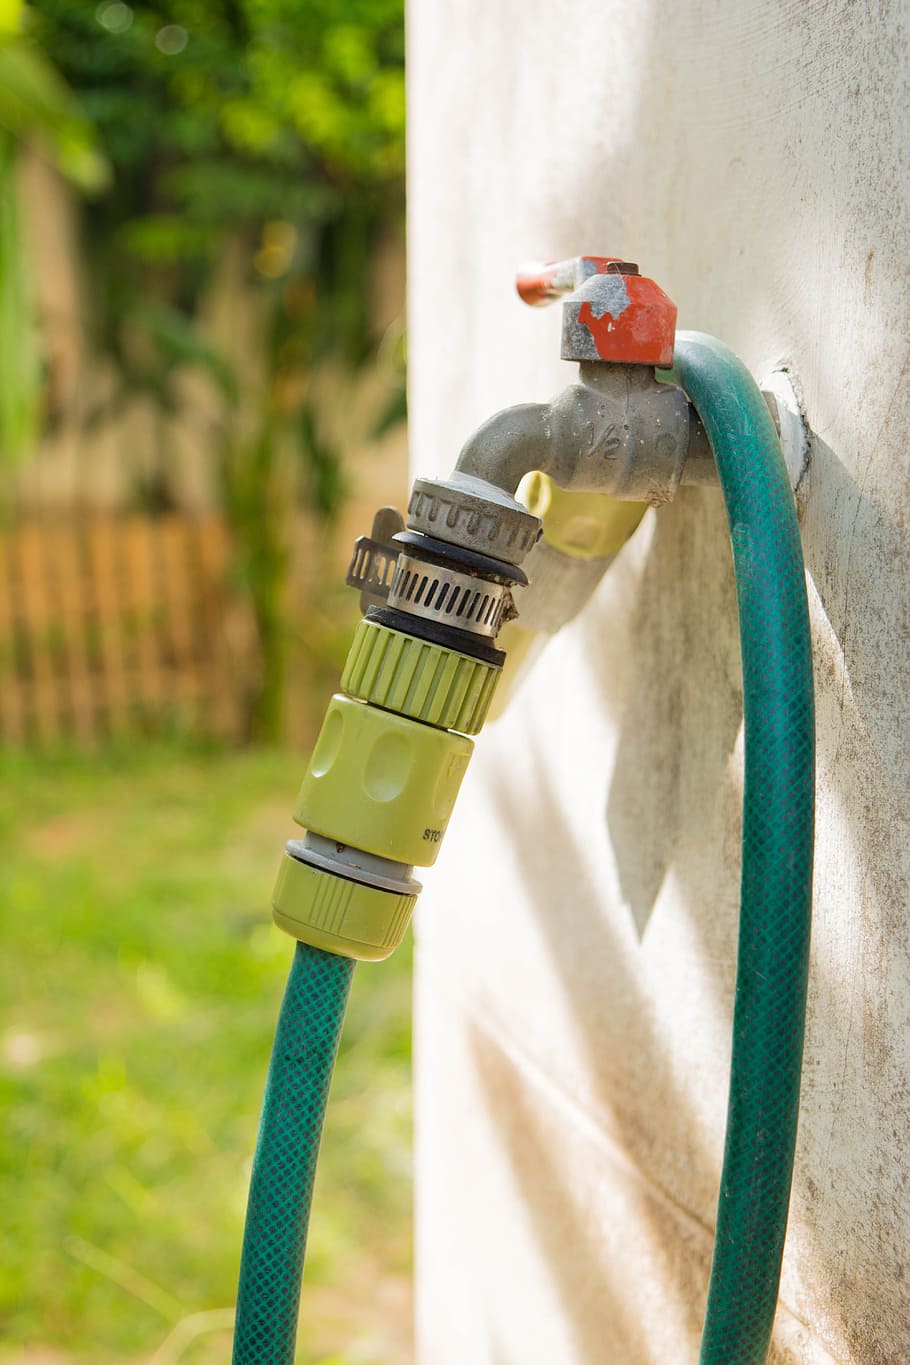 connect, faucet, garden, green, house, hydrant, joint, old faucet, outdoor, pipe